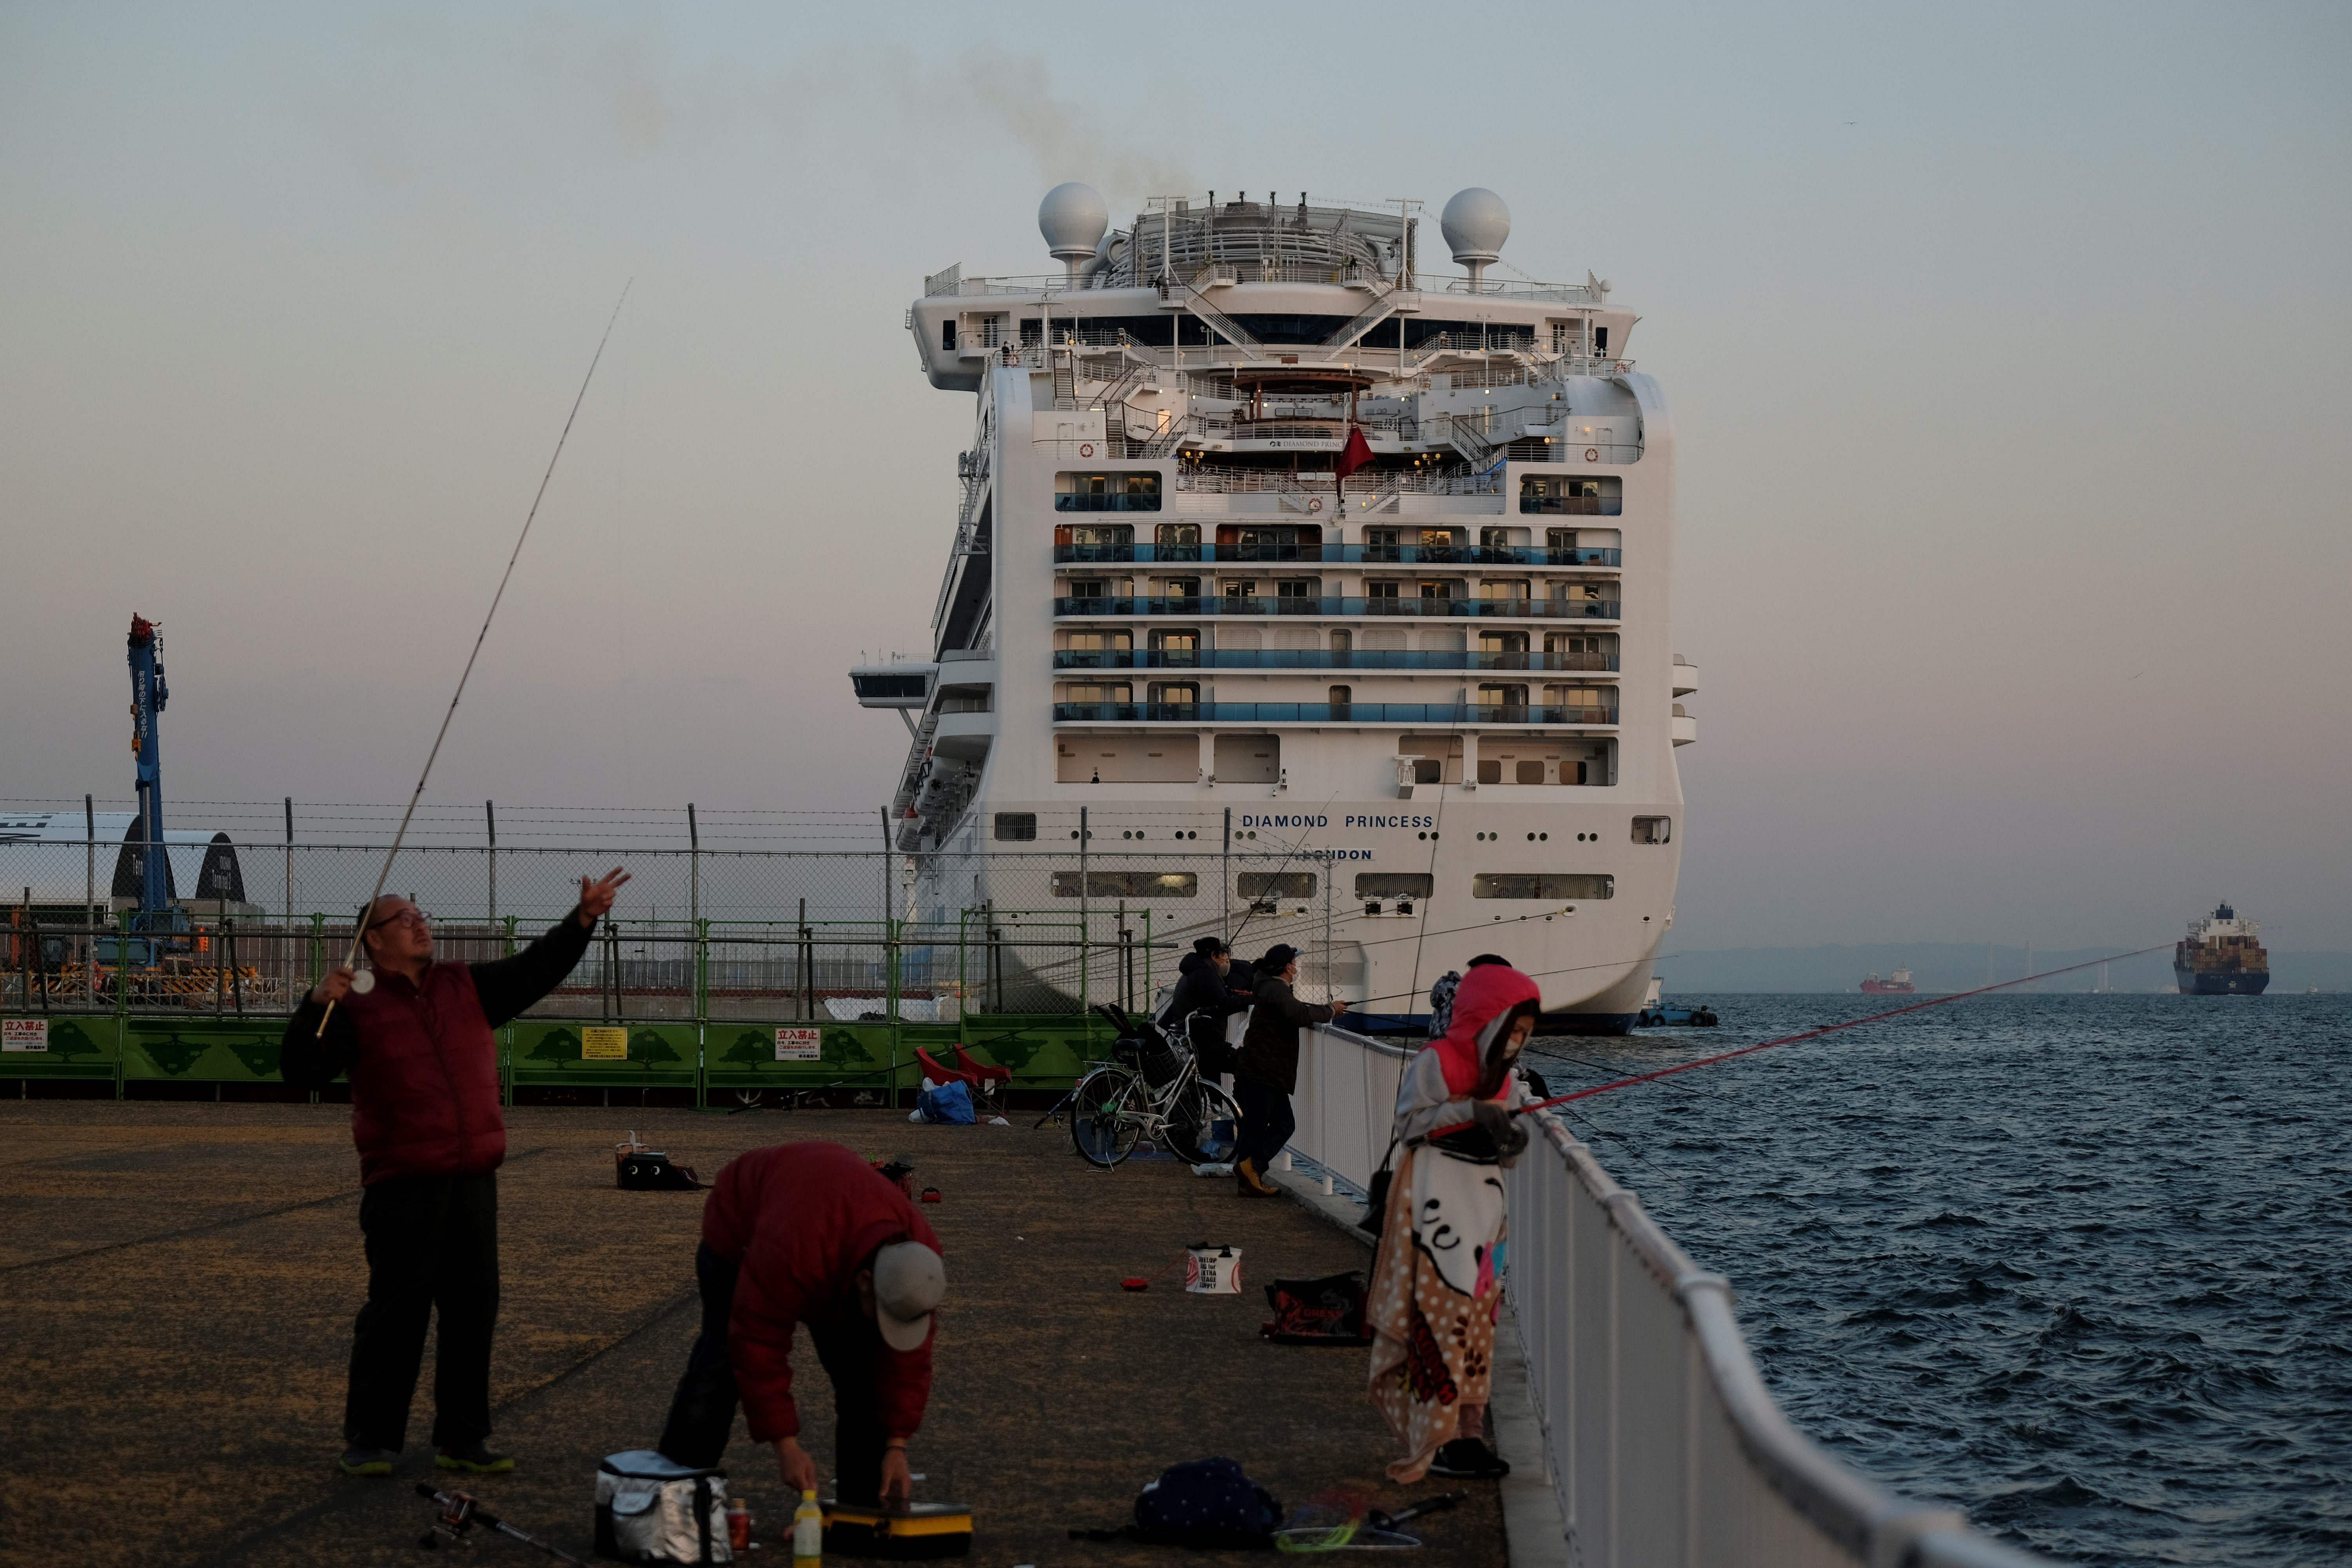 The ship was quarantined after a passenger who disembarked last month in Hong Kong was found to be the carrier of the disease. (Credit: AFP Photo)